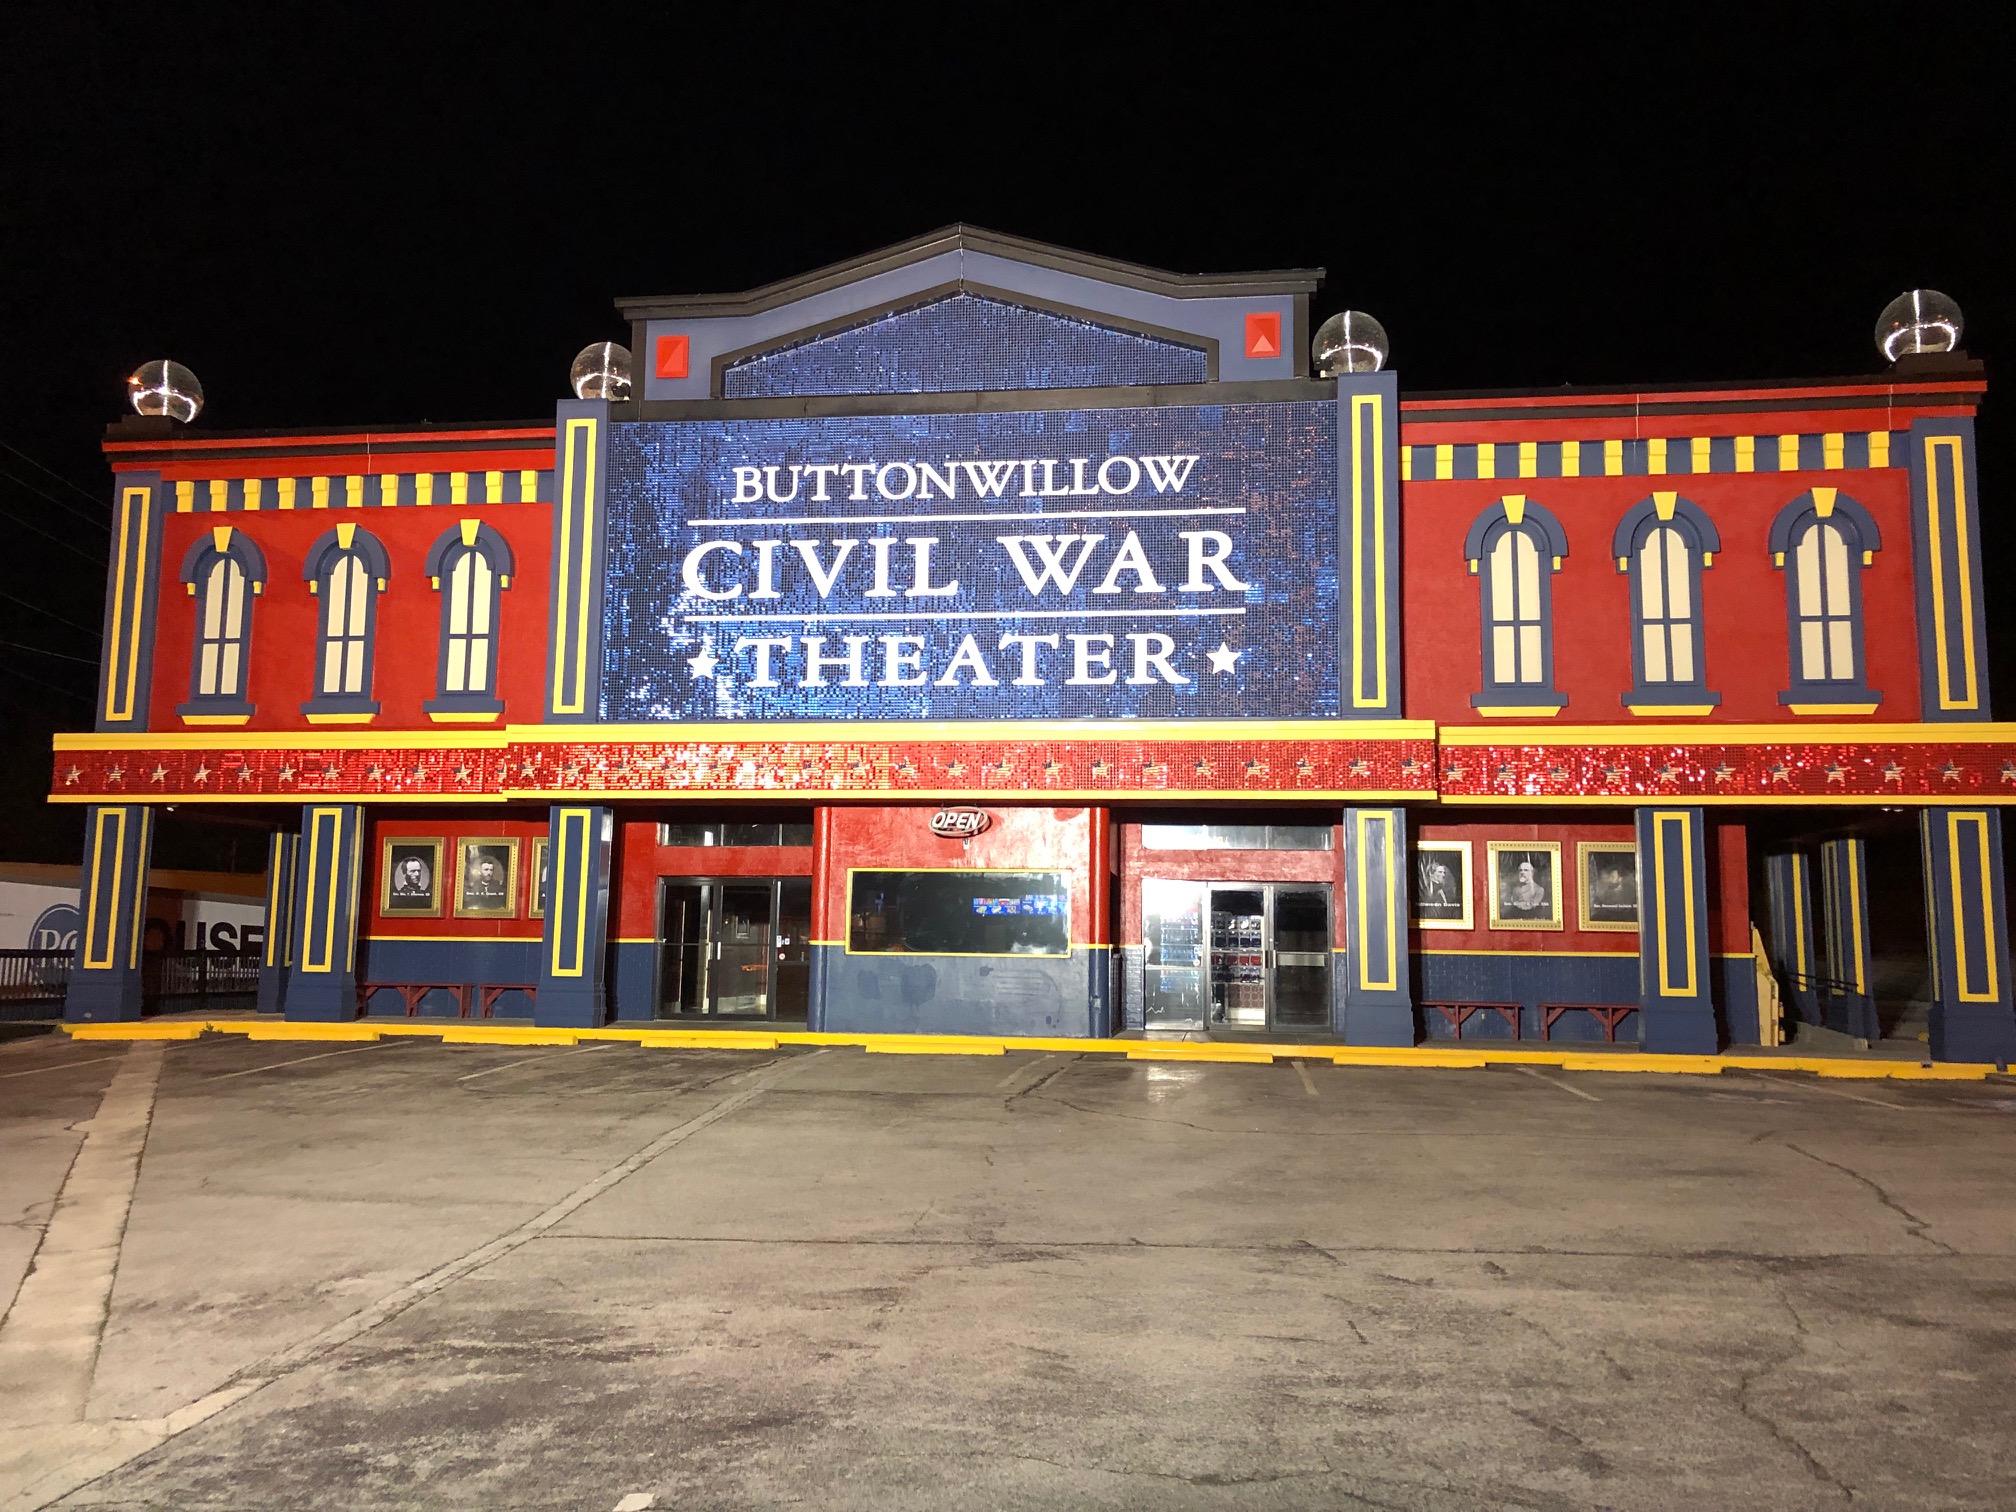 New Civil War Theater Offering Sevier County Days Special – March 21-24